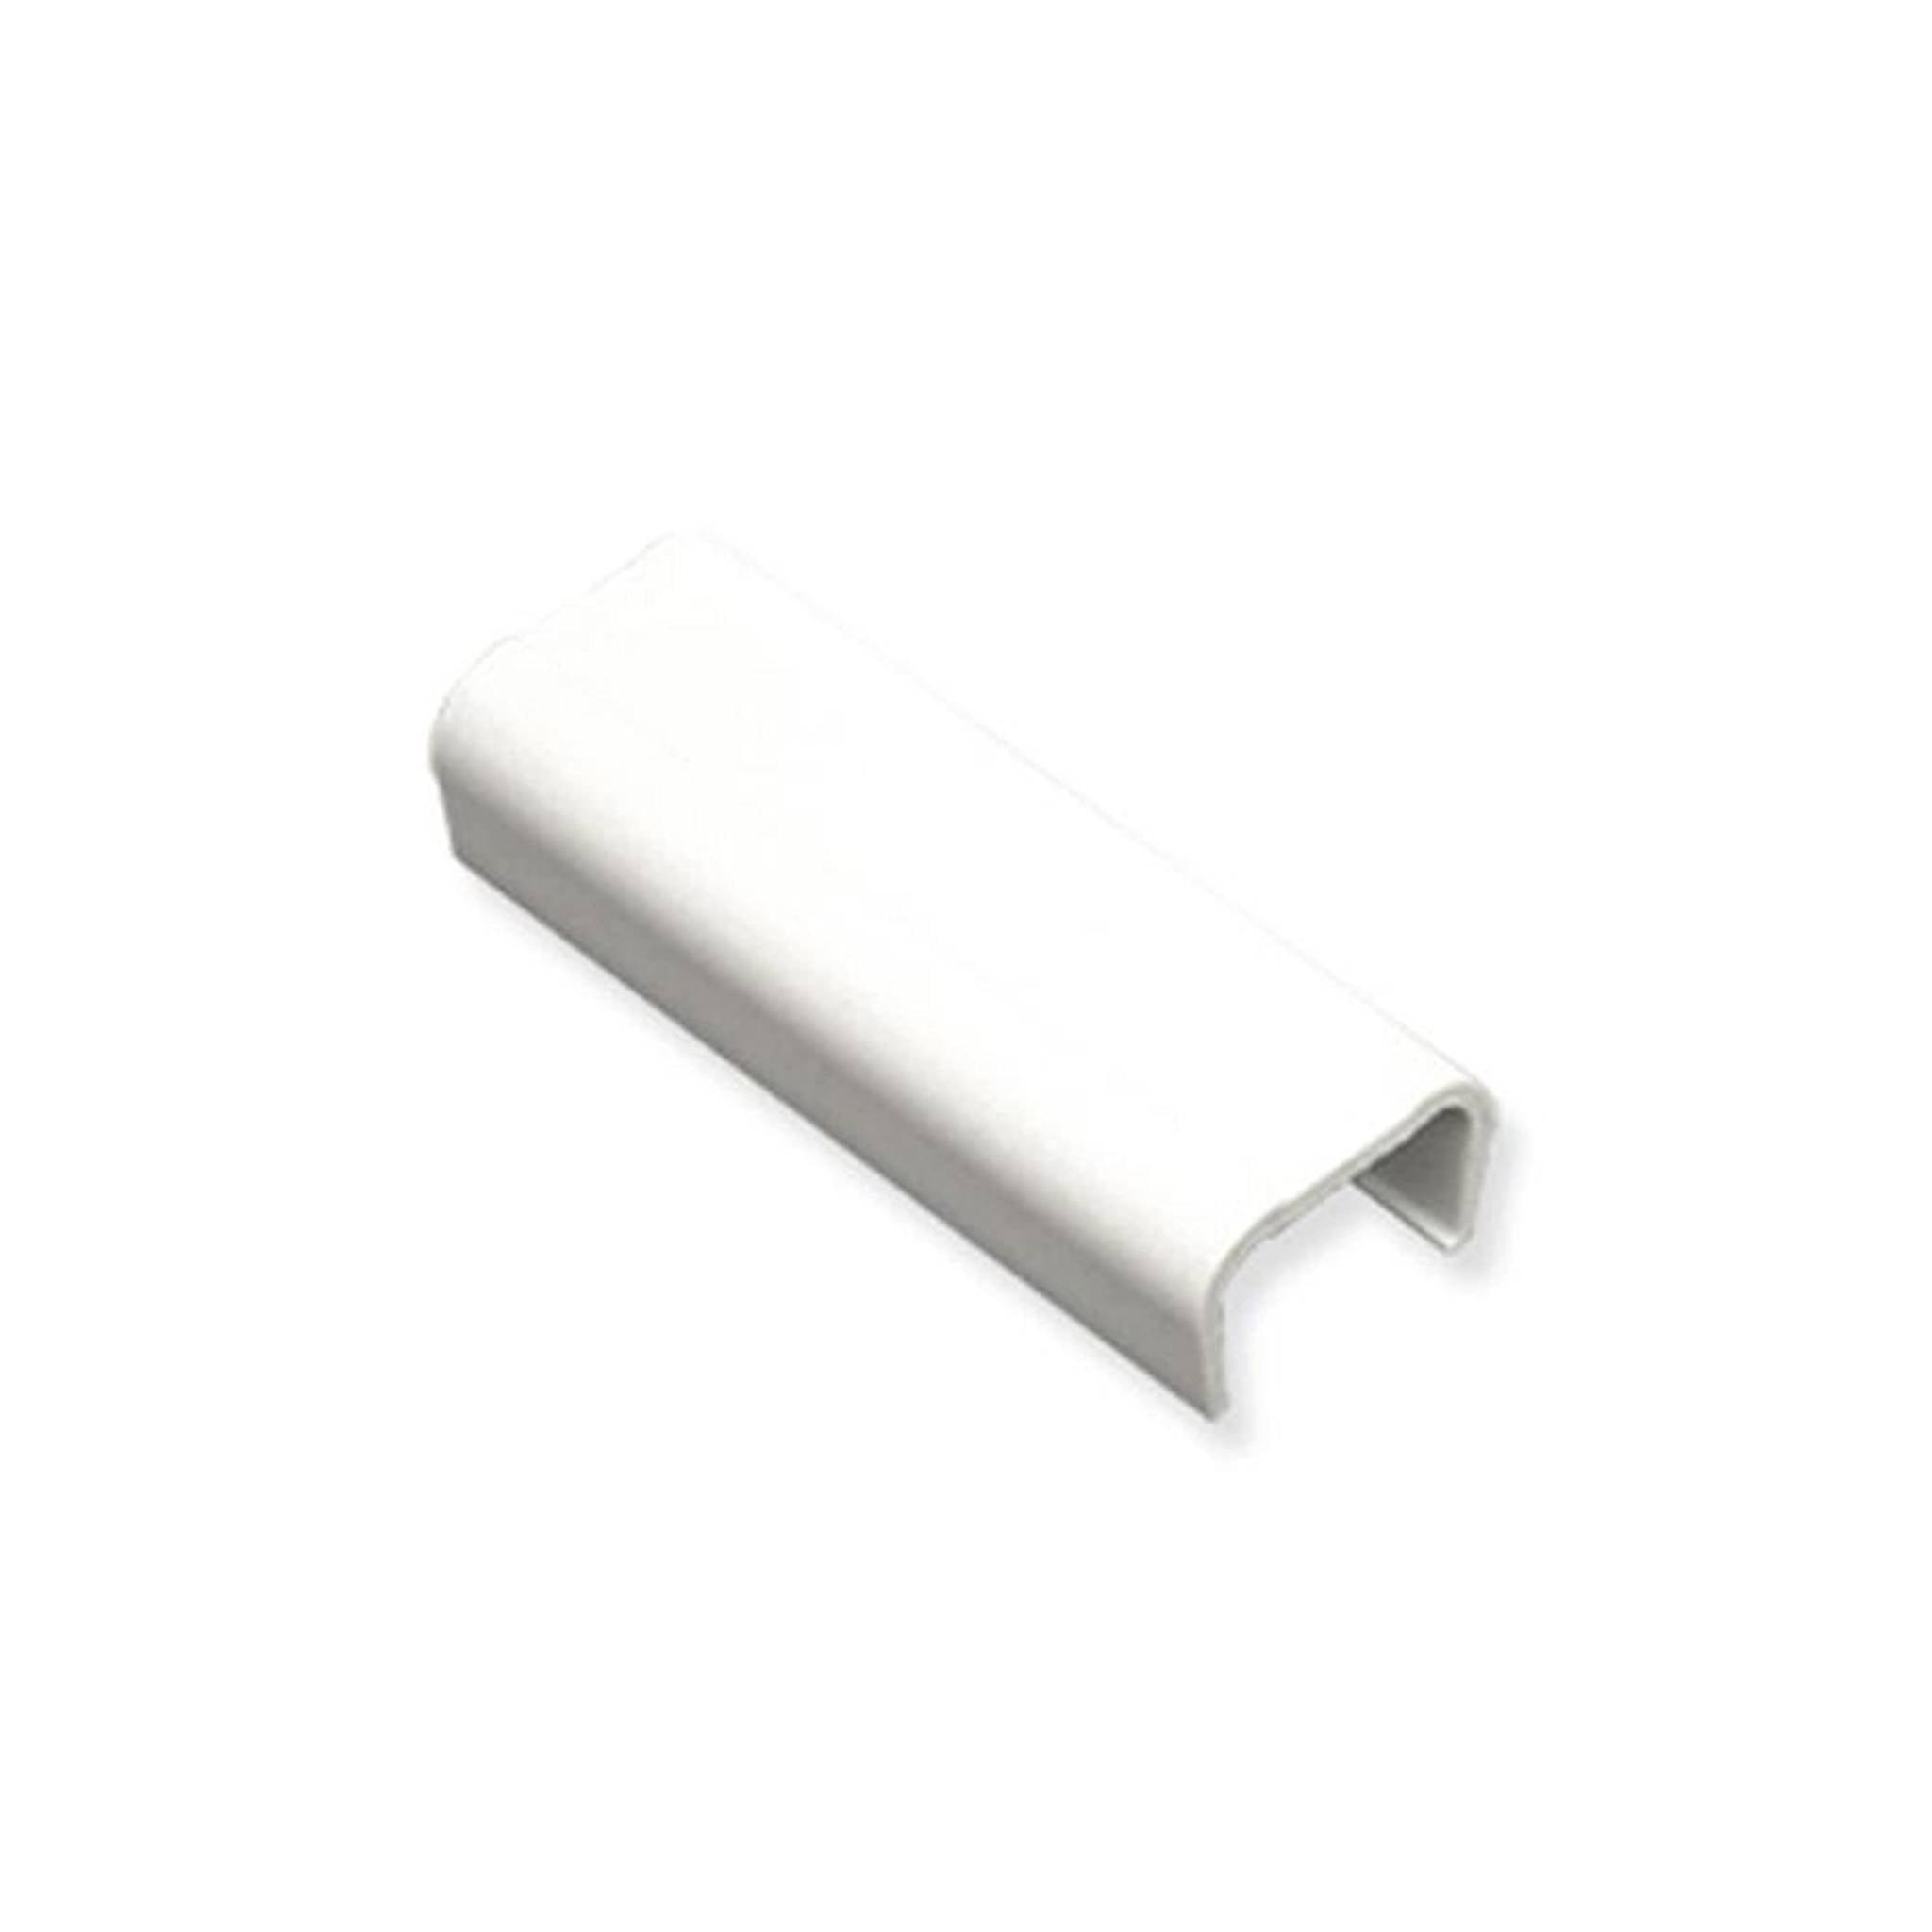 ICC Joint Cover, 1 3/4", White,